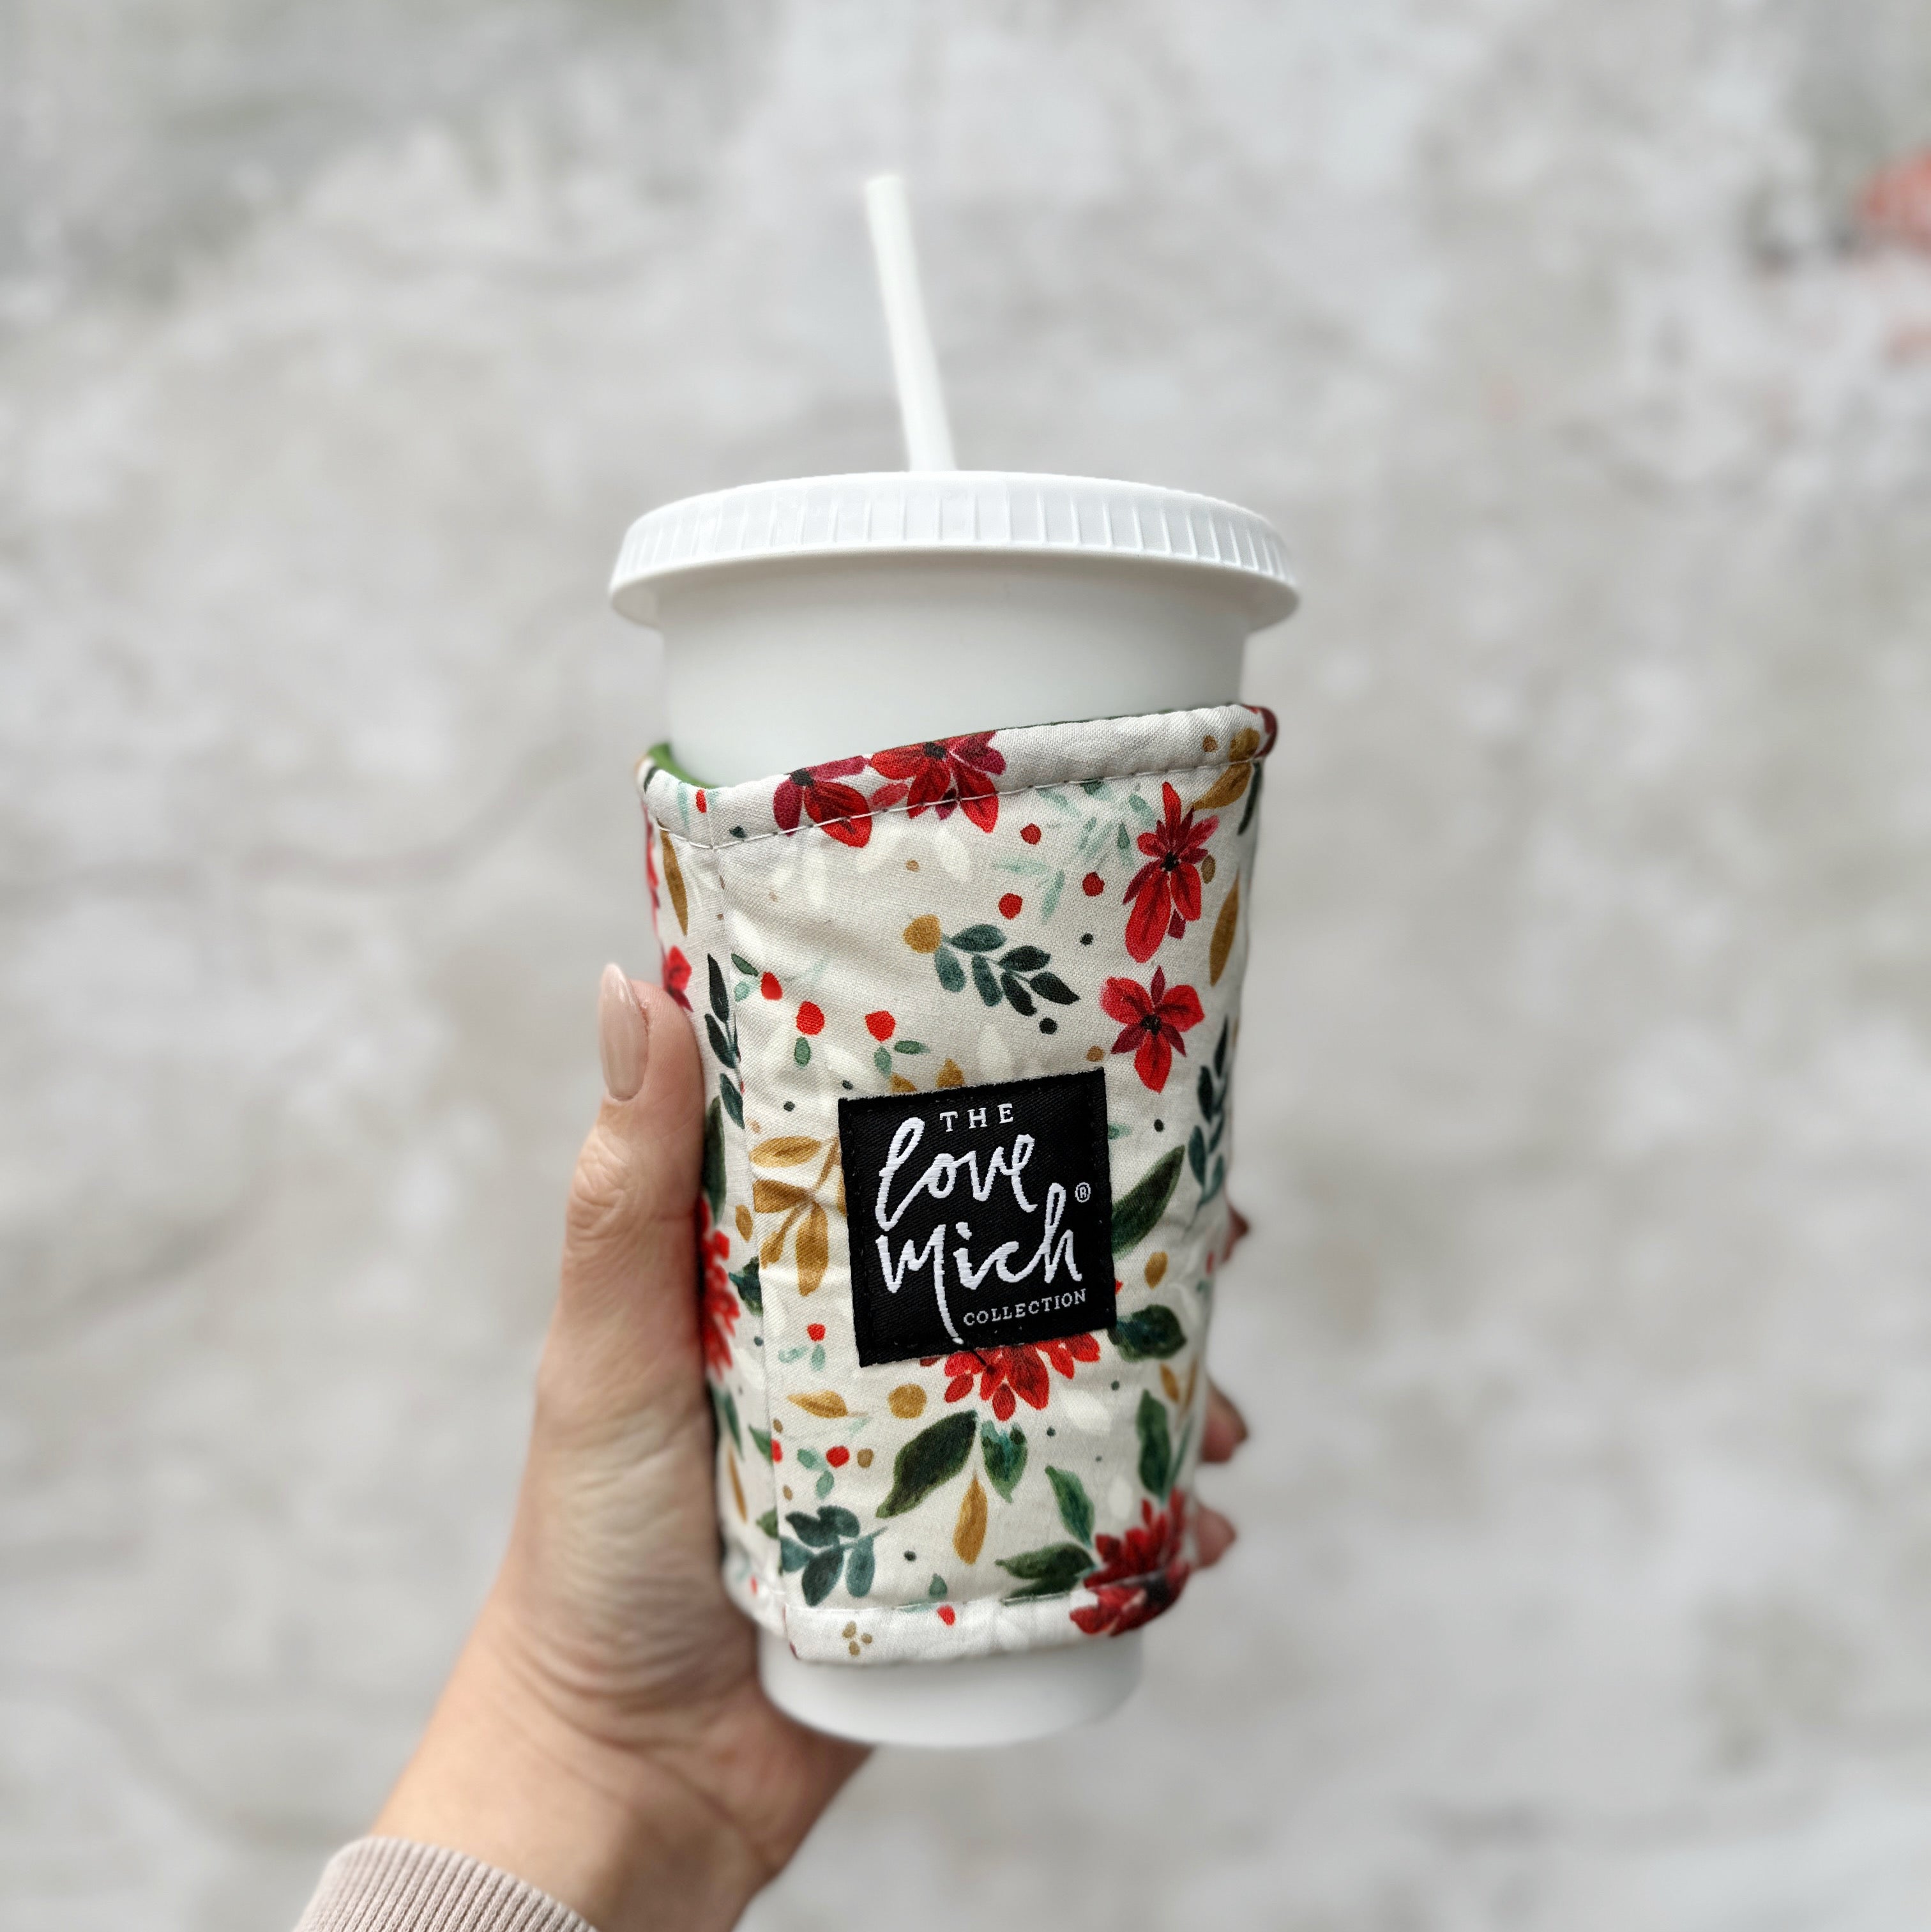 wholesale share takeaway beverage drinking cups